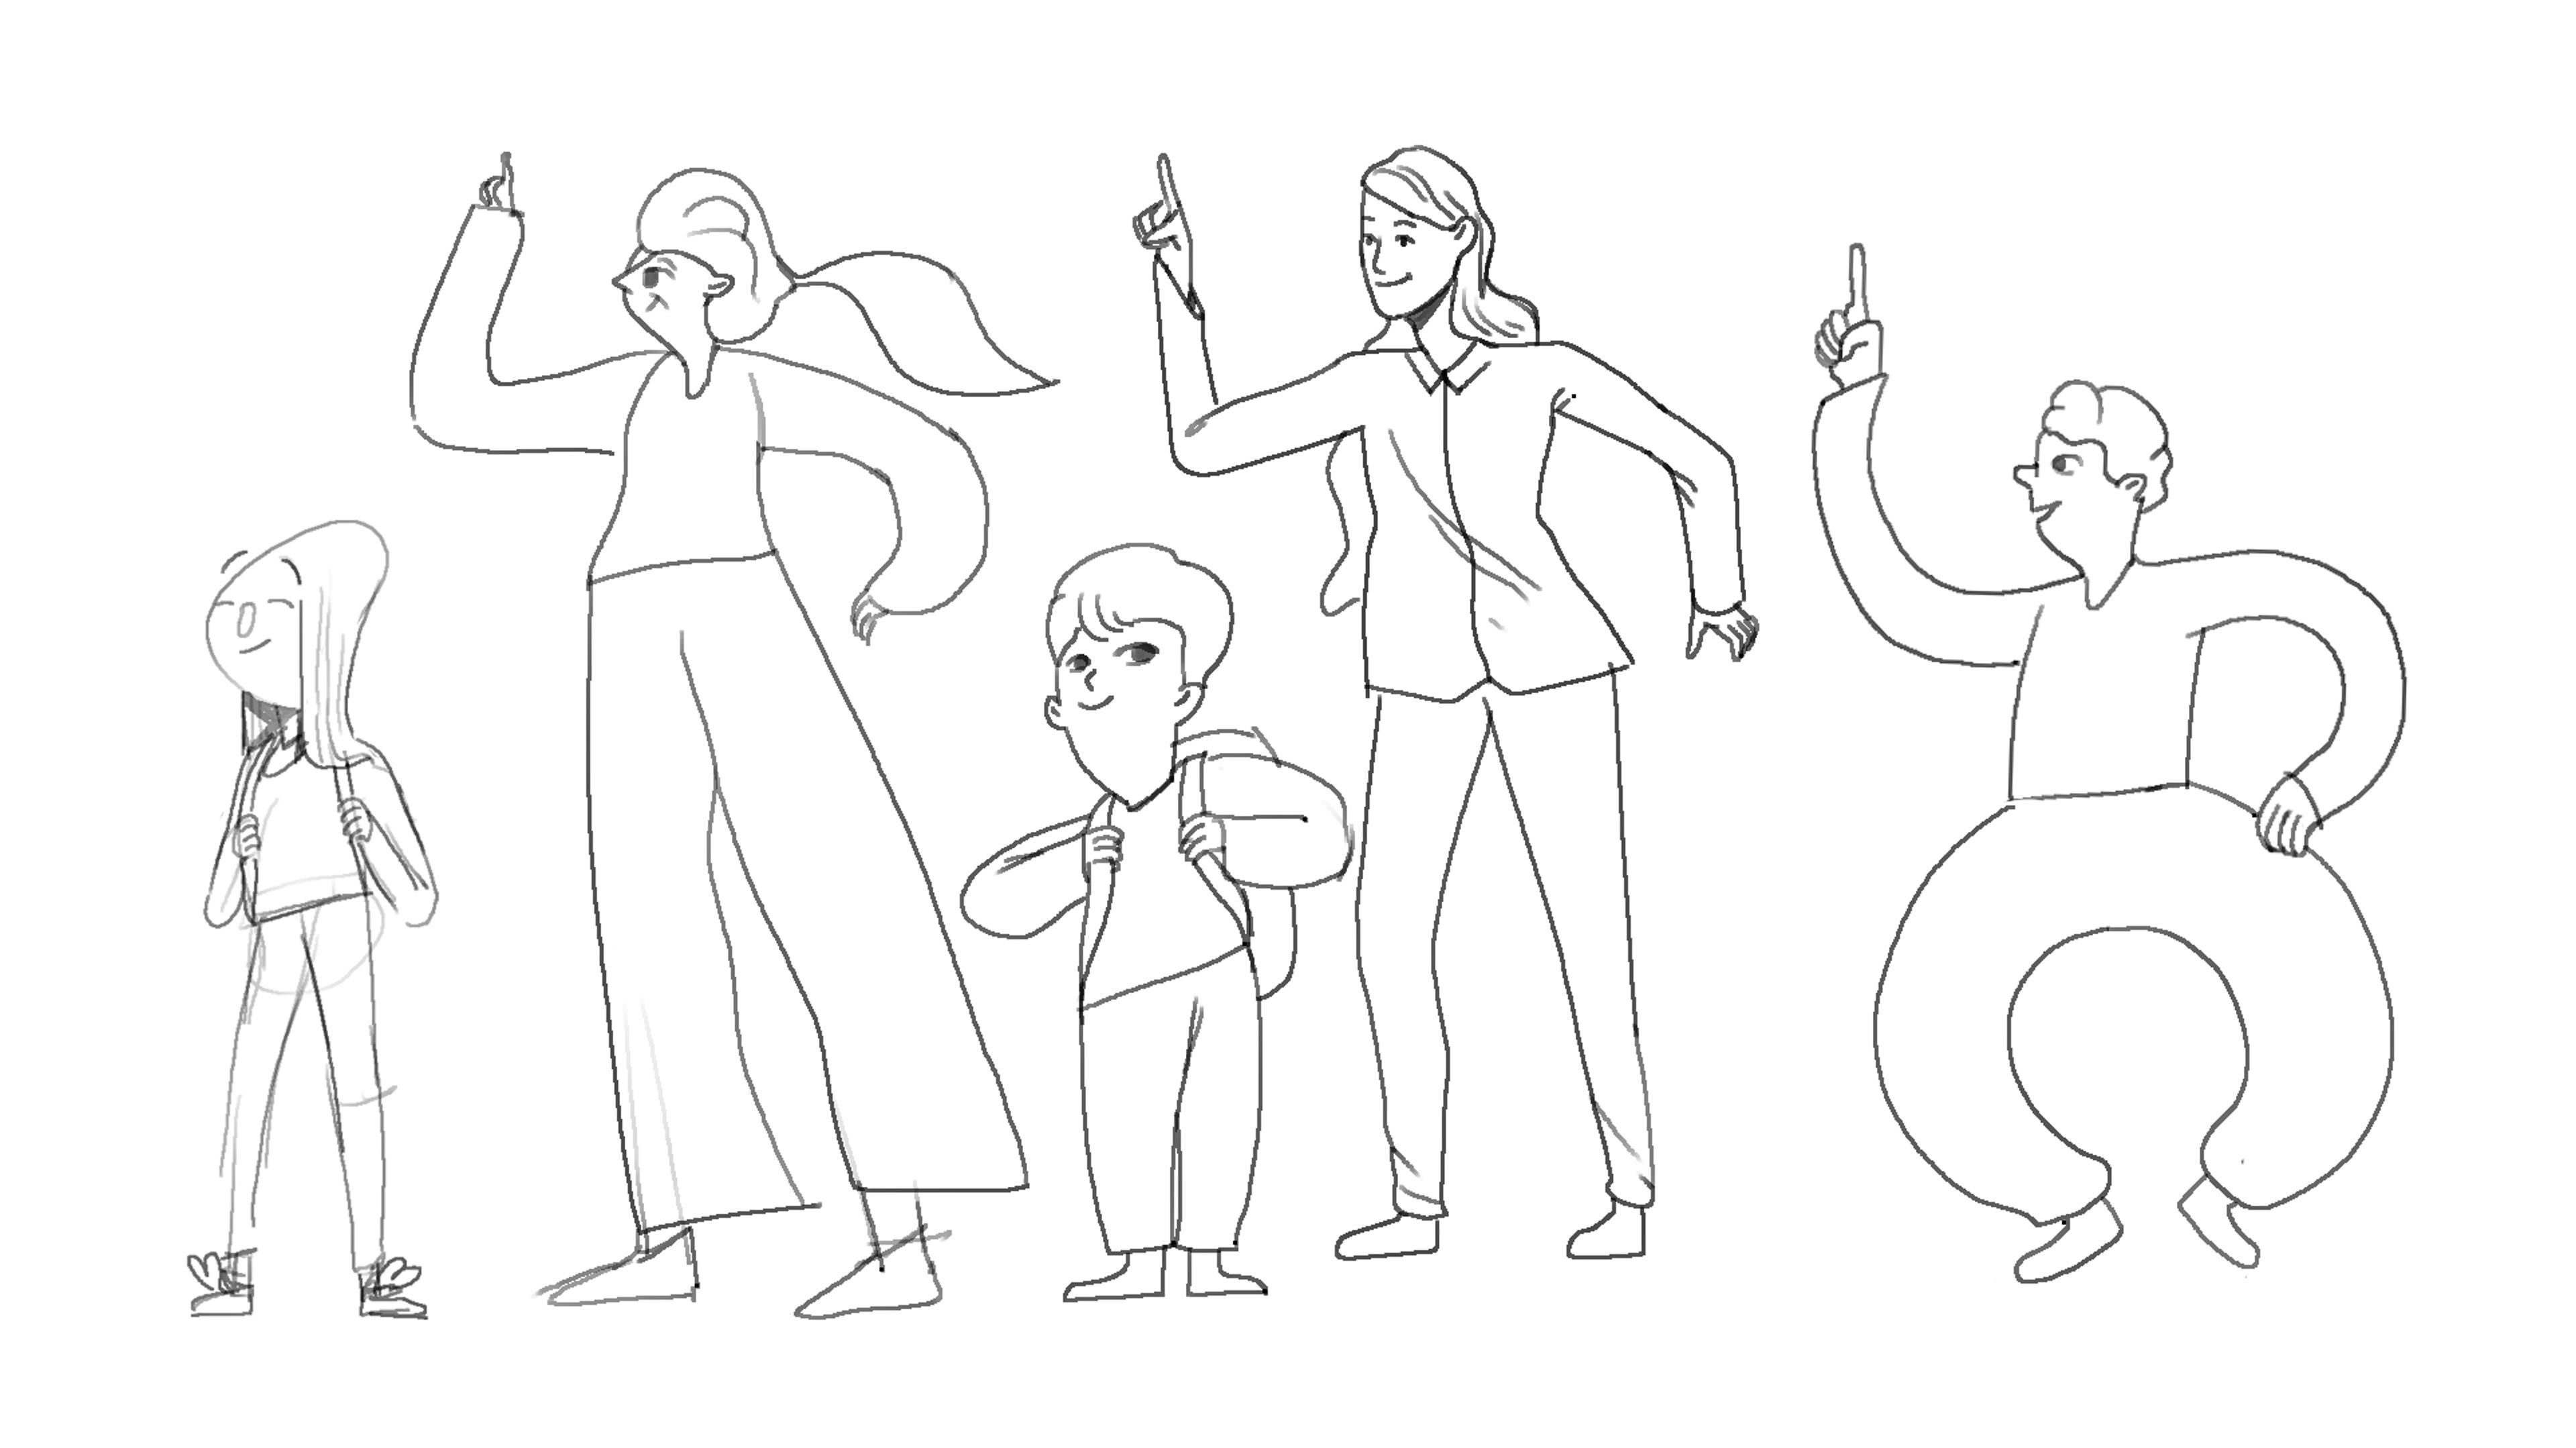 Nota sketch of character design possibilities